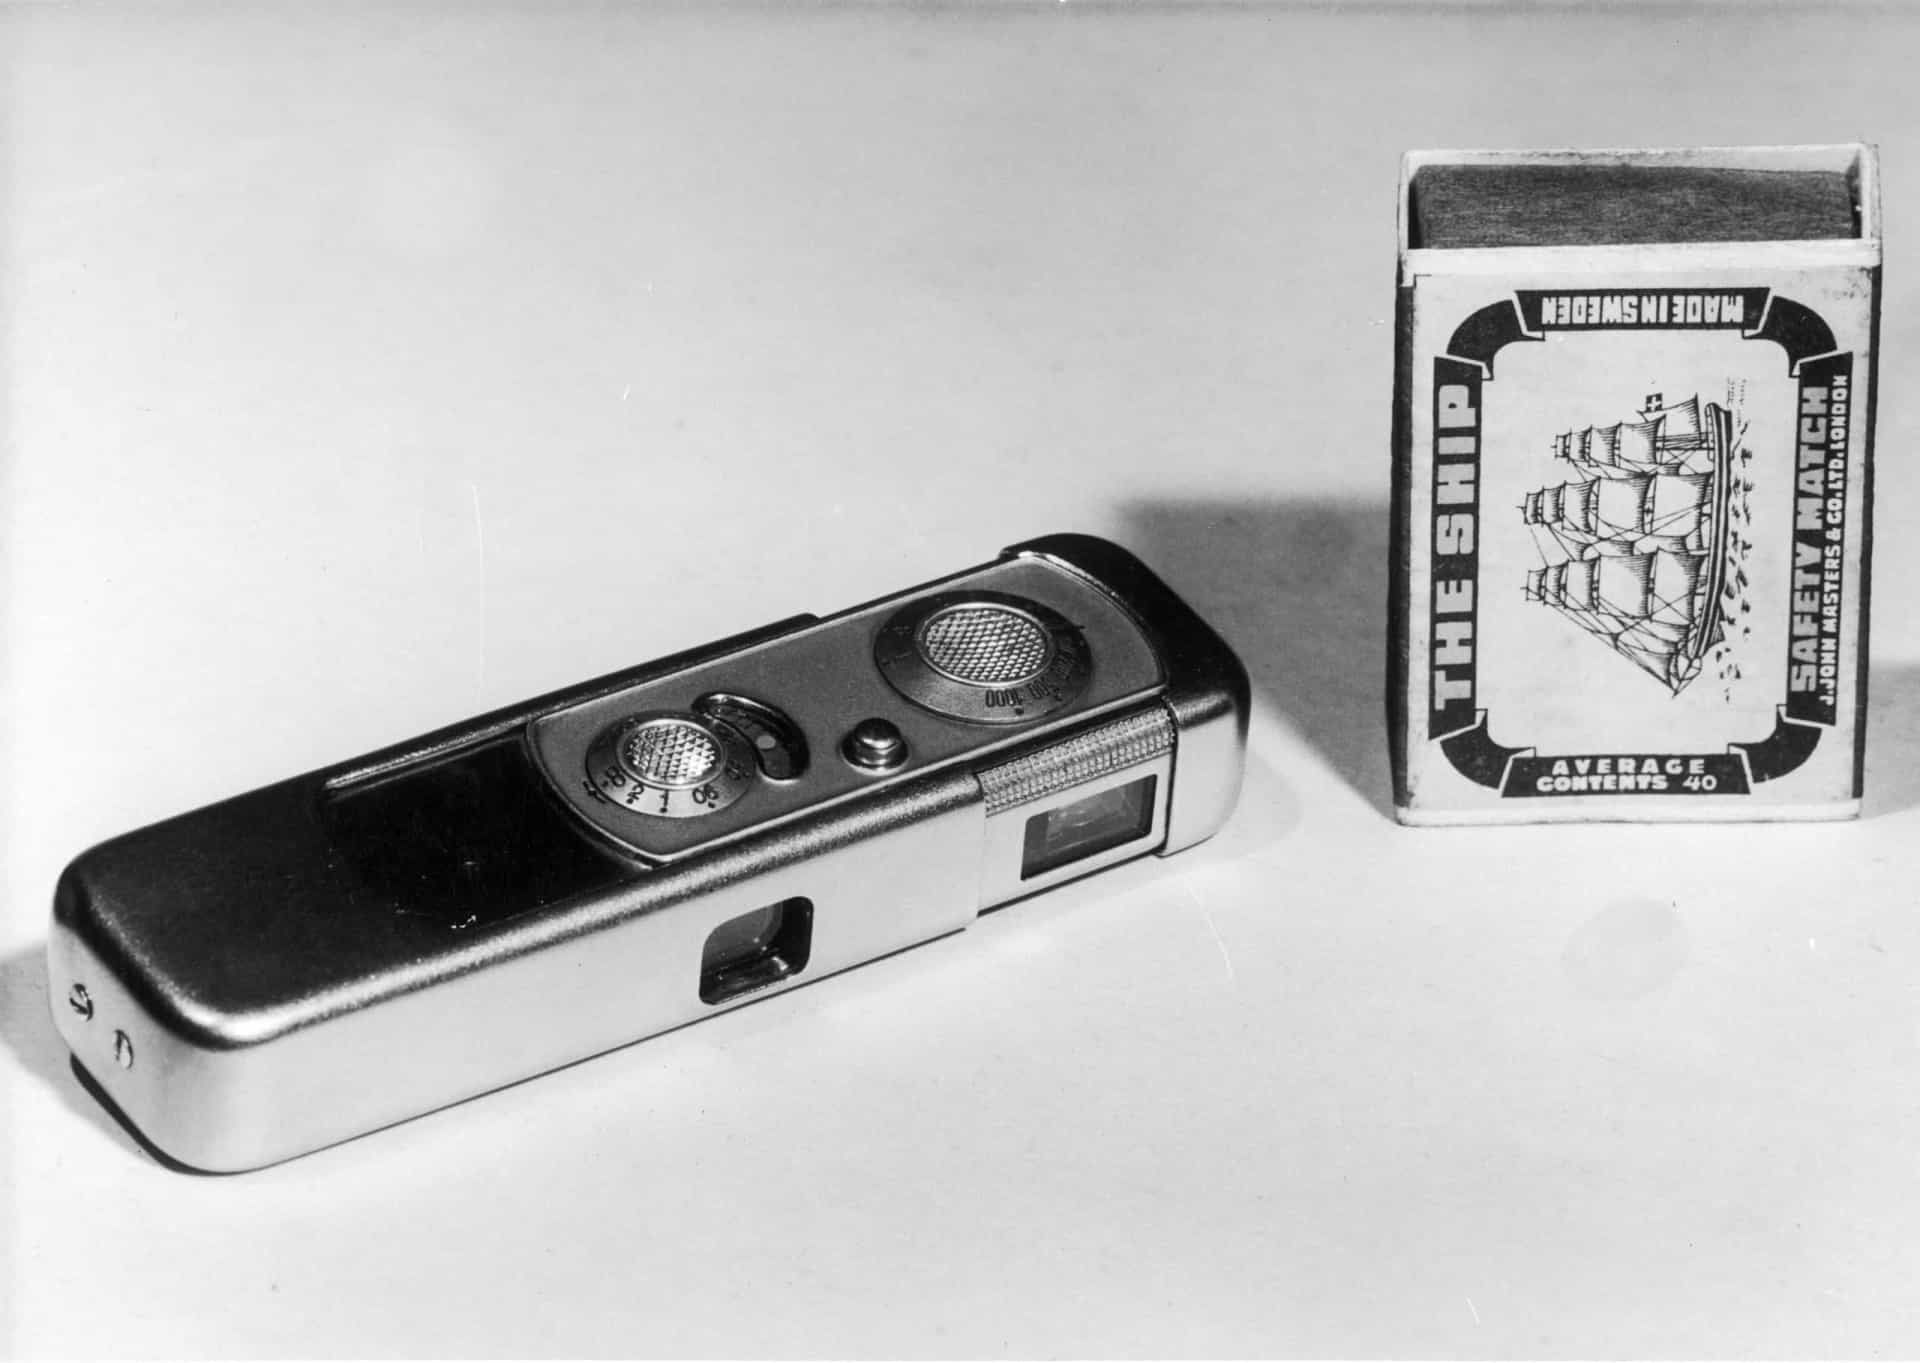 <p>Early spy gadgets issued to agents on both sides included the Minox spy camera, pictured here against a box of matches for scale. A more ingenious—and eye-watering—device was the so-called "rectal escape kit." A spy would hide the escape kit in his or her rectum, just in case they were captured and imprisoned.</p>